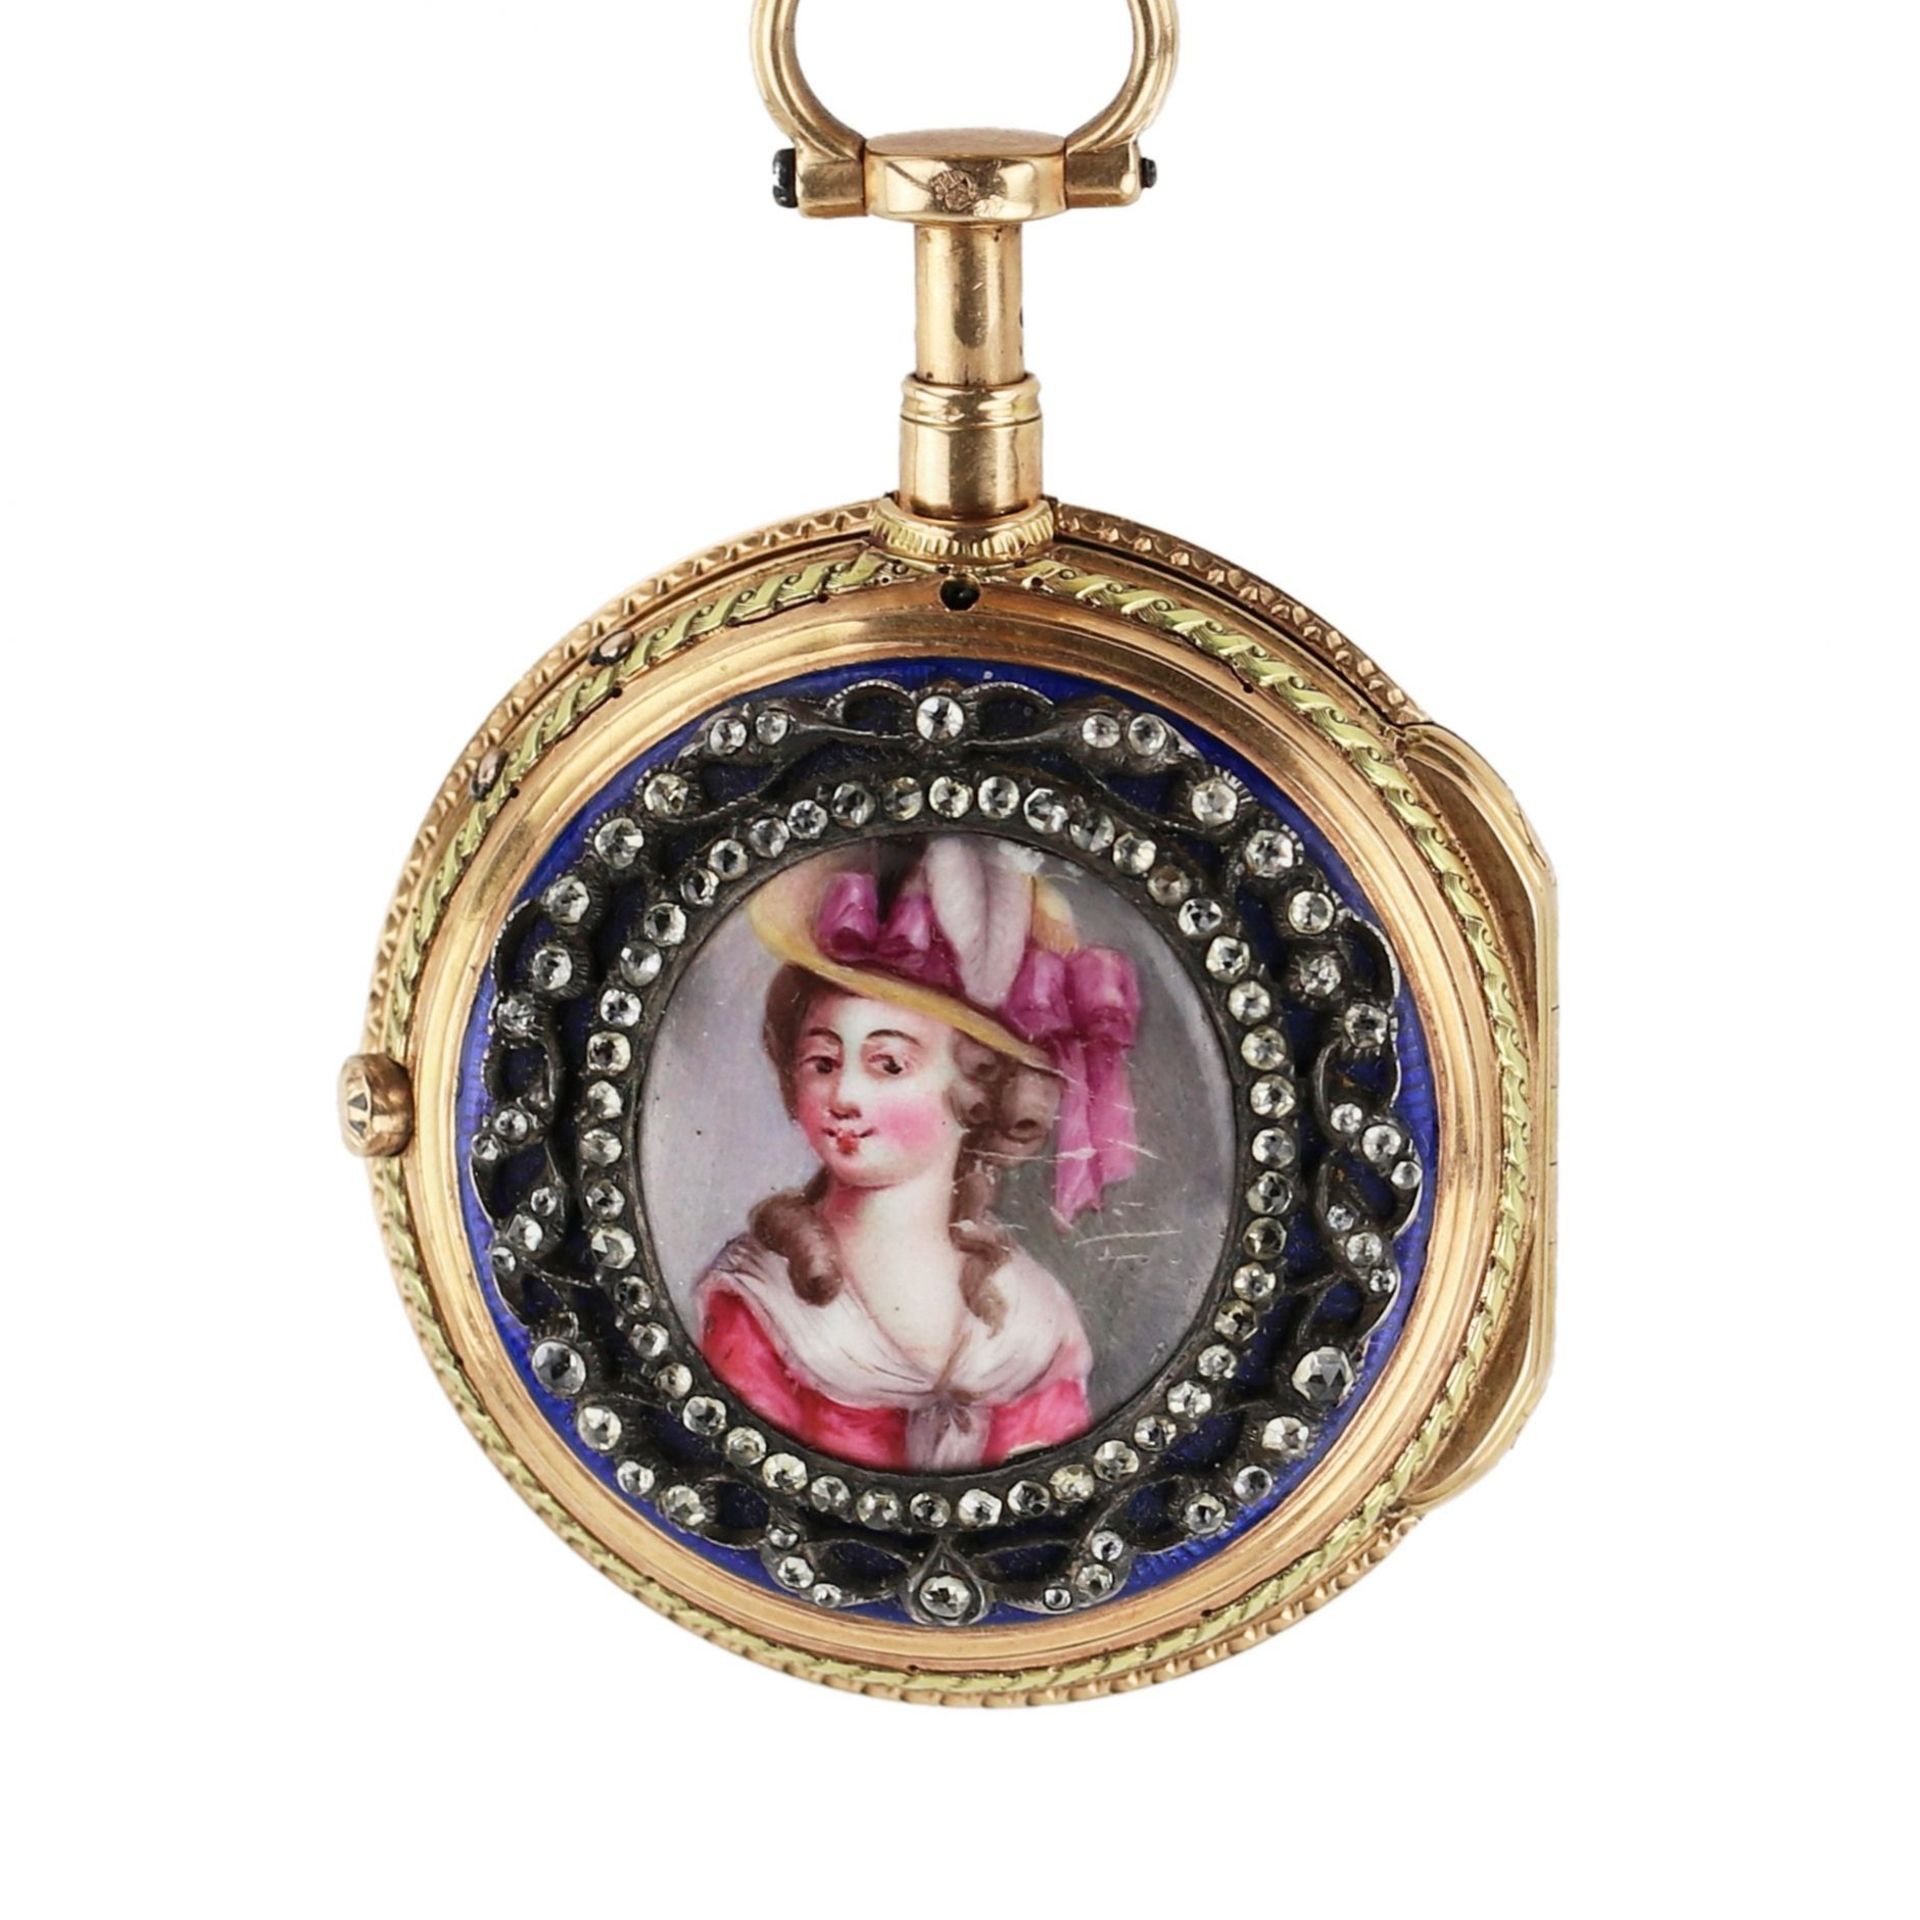 Chatelain with gold pocket watch, diamonds and enamel painting. France 19th century. - Image 7 of 10